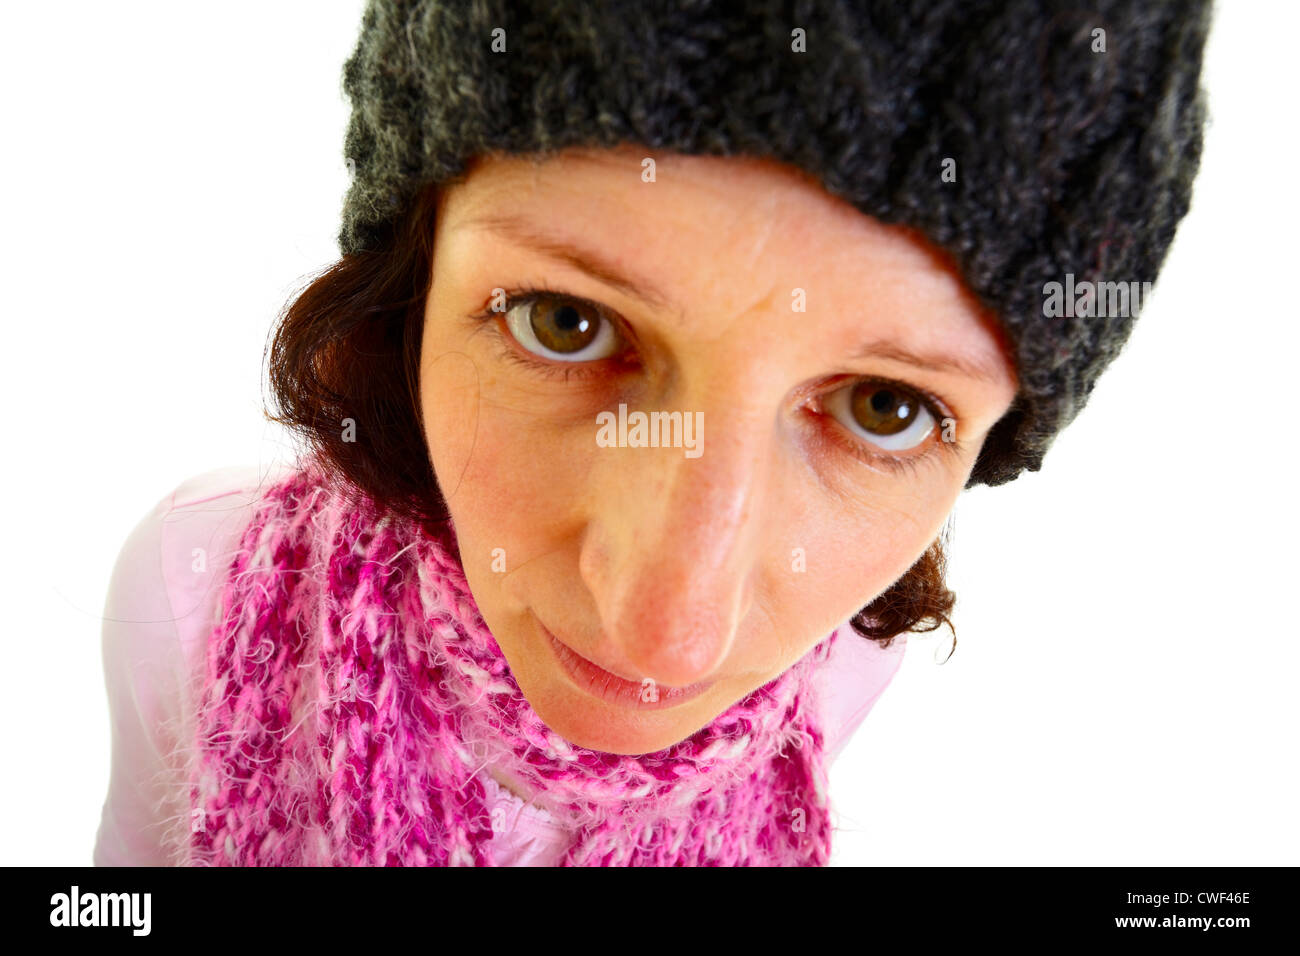 Young brown-haired woman with a wool cap makes funny facial expression, isolated on white background, studio shot. Adobe RGB Stock Photo